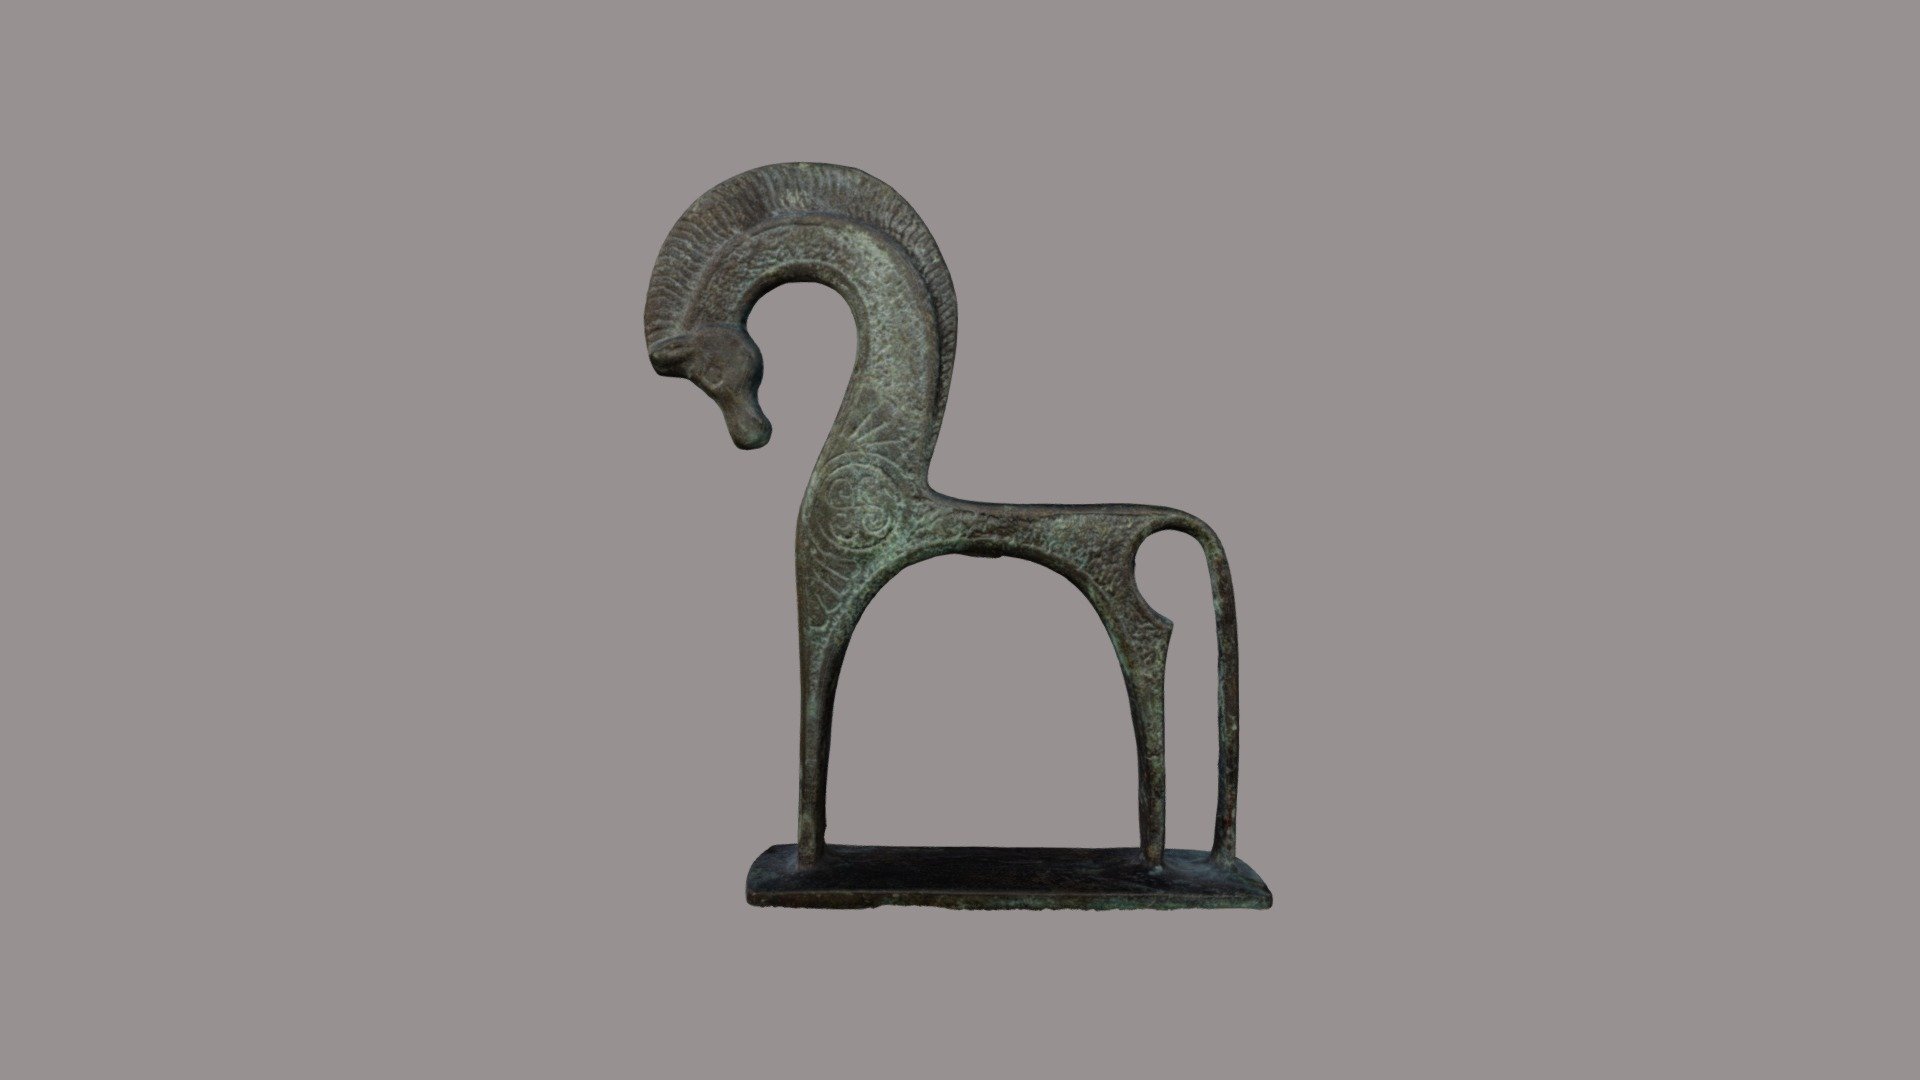 Replica, attic, bronze horse, height: 12,5 cm, 1000 - 700 B.C.E. (so-called geometrical period). The original can be found in the National Museum of Athens.
The term &ldquo;Geometric Style